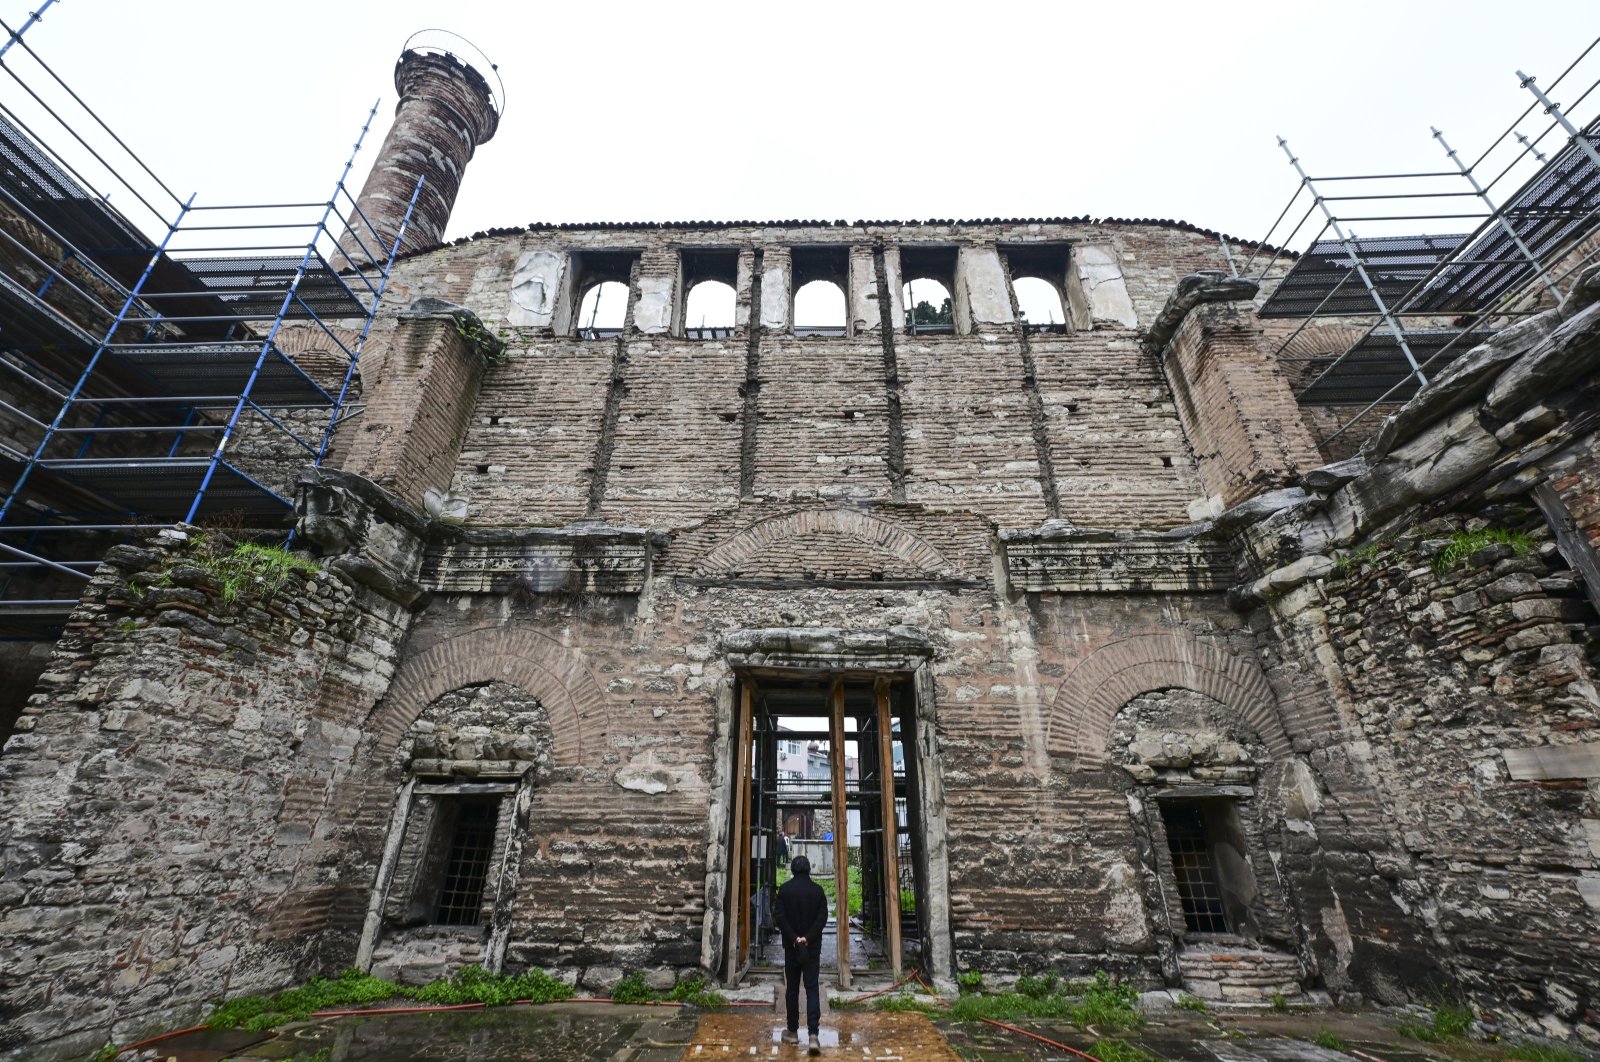 The Imrahor Ilyas Bey Mosque, also known as the Monastery of Stoudios, dating back earlier than Hagia Sophia and established in the fifth century, maintains its significance as the oldest religious structure in Istanbul, Türkiye, Dec. 7, 2023. (AA Photo)